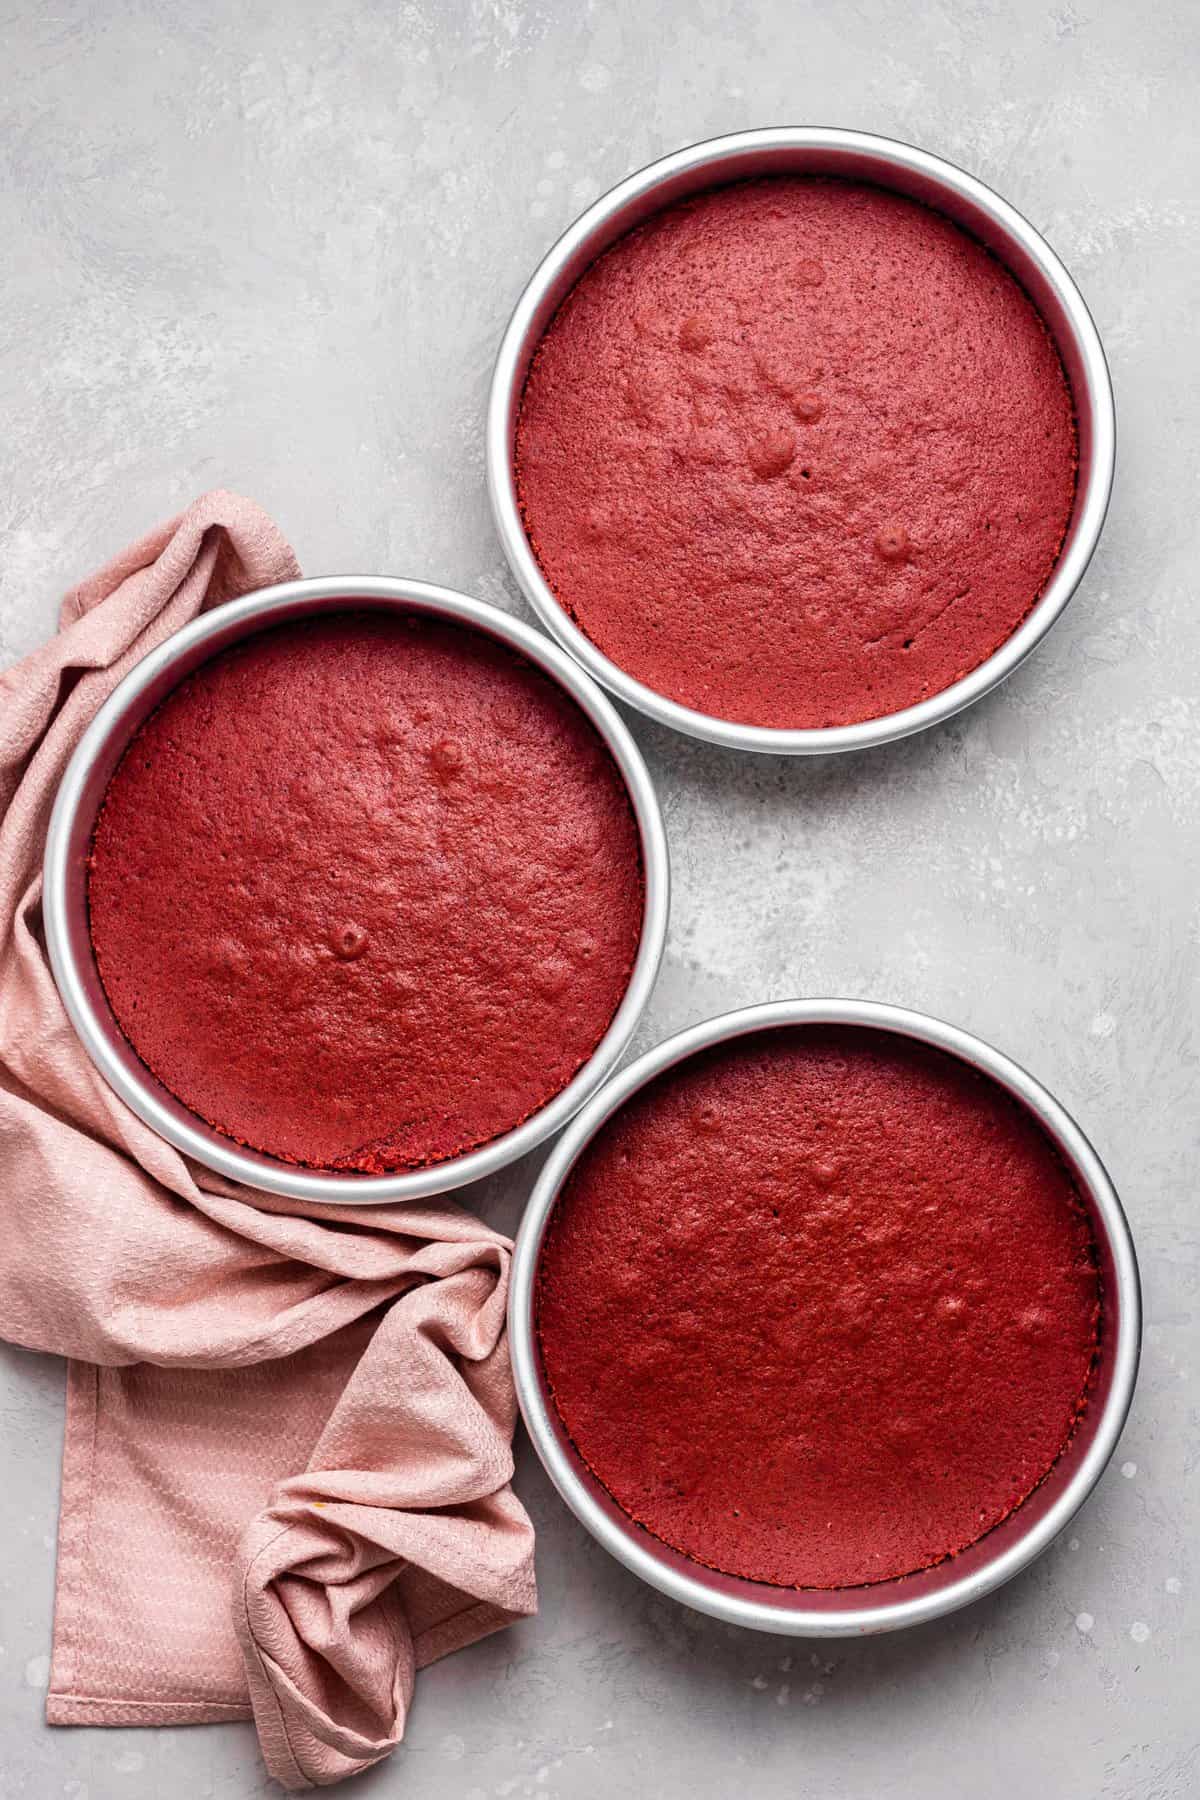 Three round cake pans with the baked red velvet cakes on metal surface. 